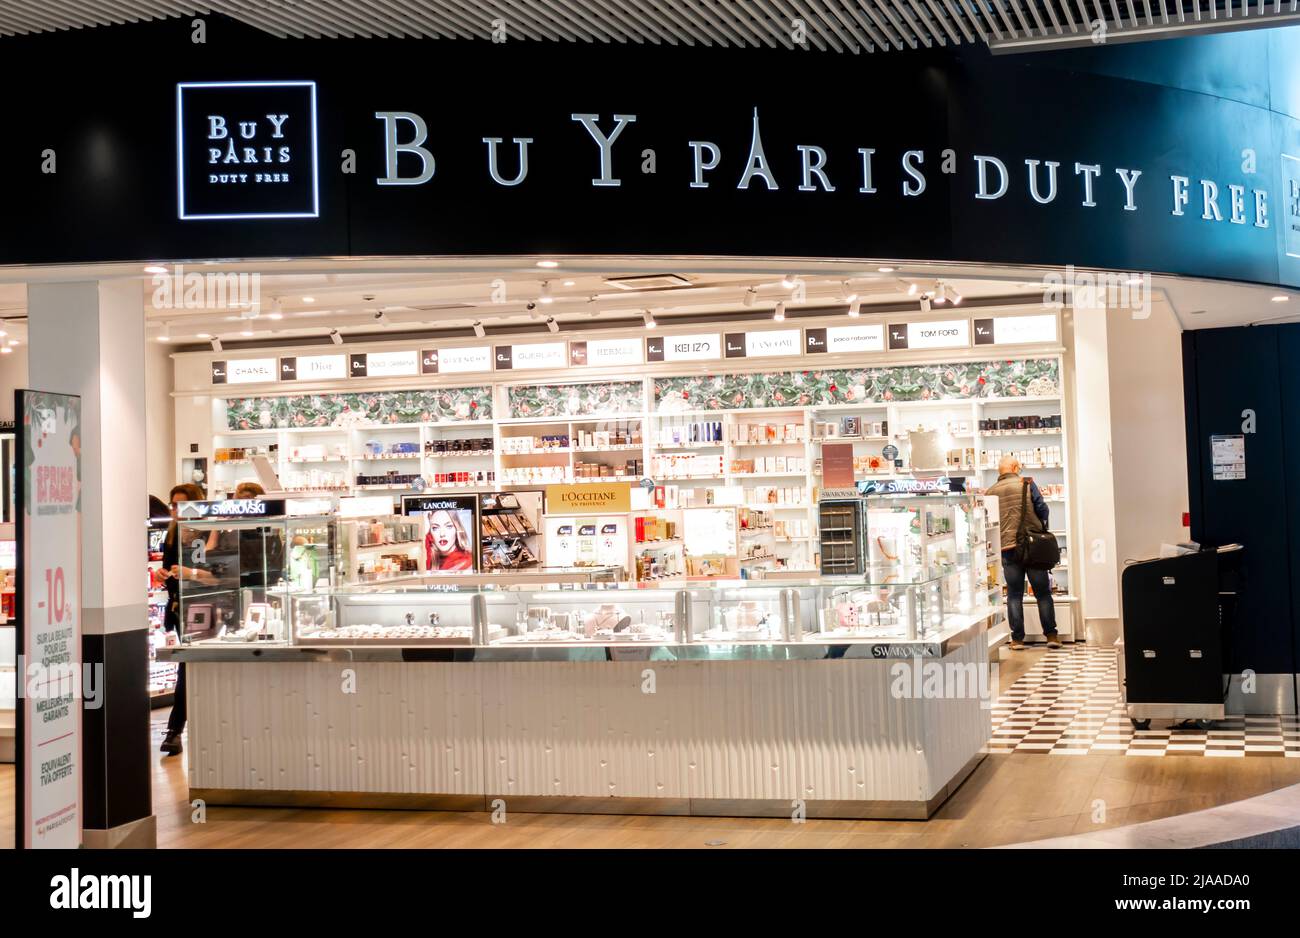 Paris CDG and Orly target 38 new openings in 2021